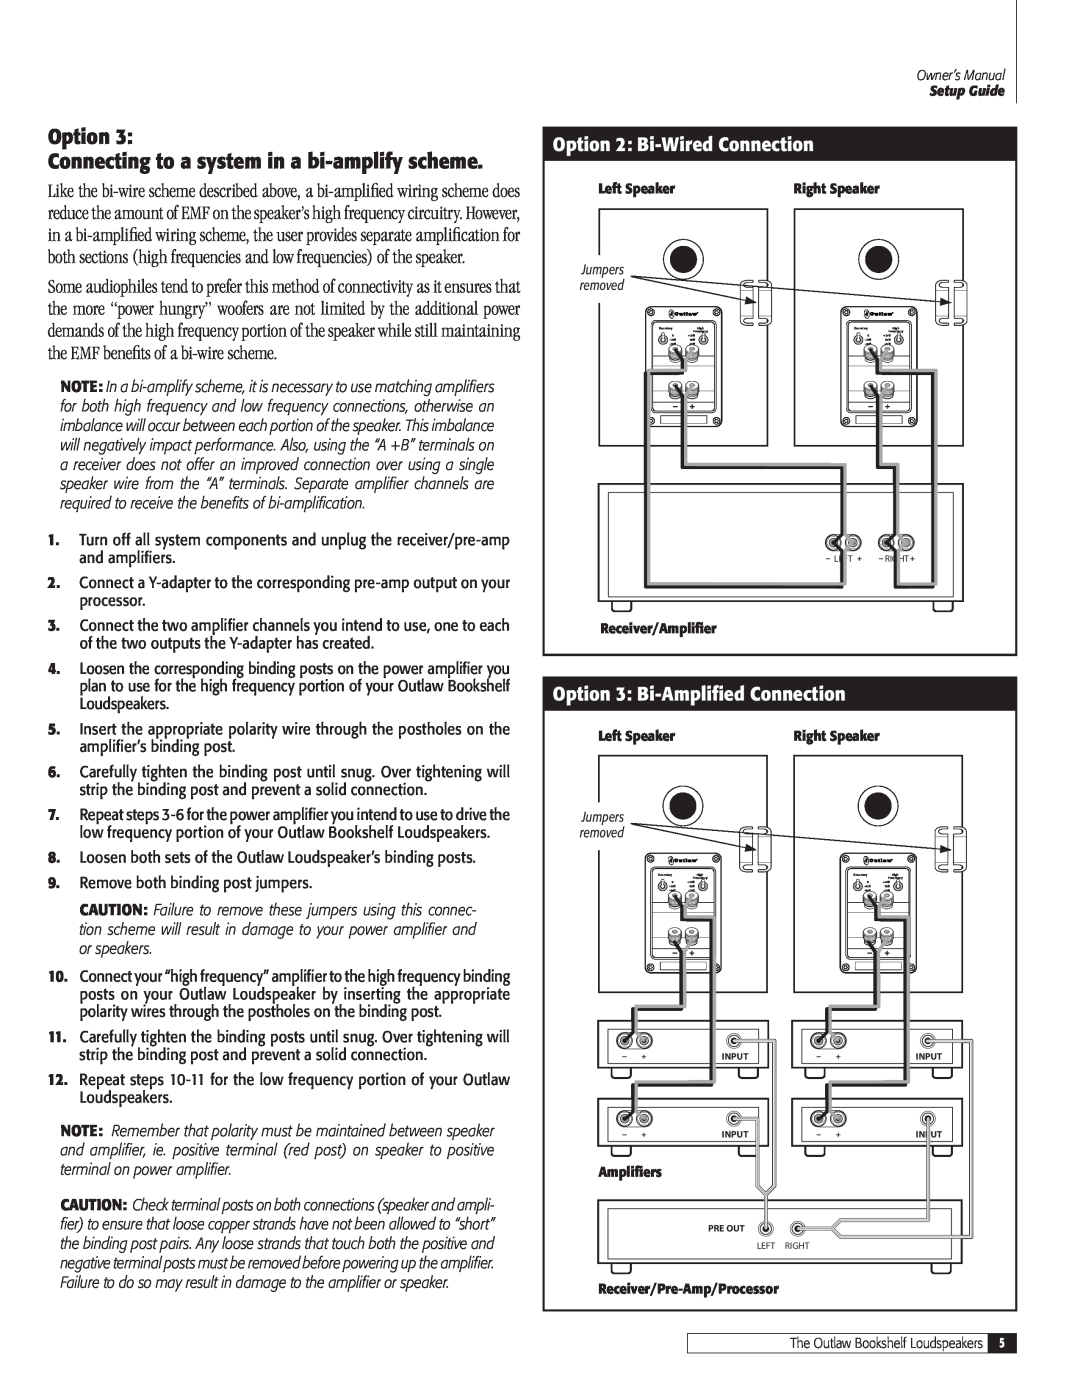 Outlaw Audio BLS-B(C) owner manual Option Connecting to a system in a bi-amplify scheme, Option 2 Bi-Wired Connection 